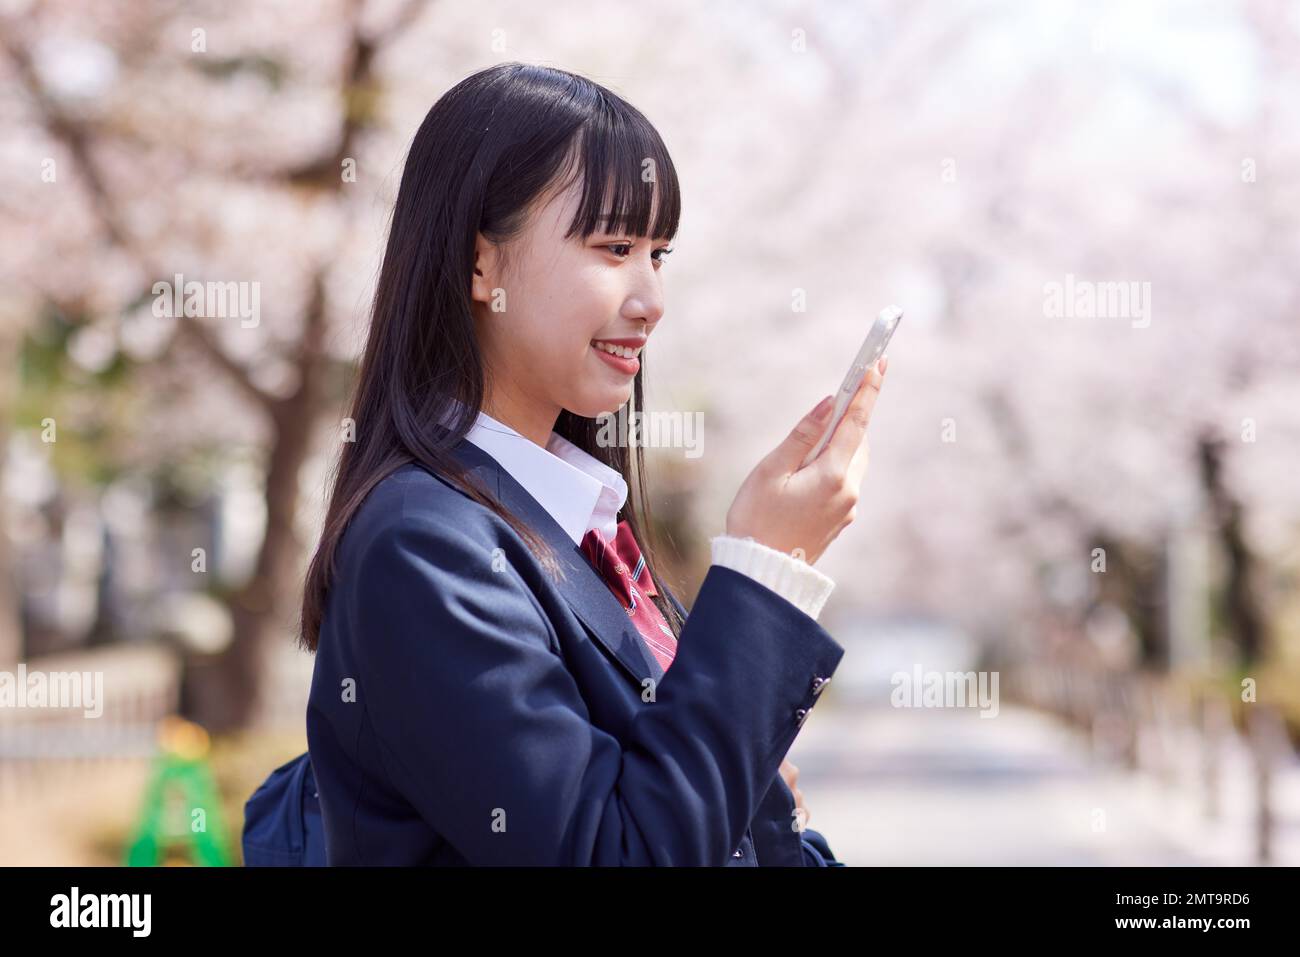 Japanese high school student portrait with cherry blossoms in full bloom Stock Photo